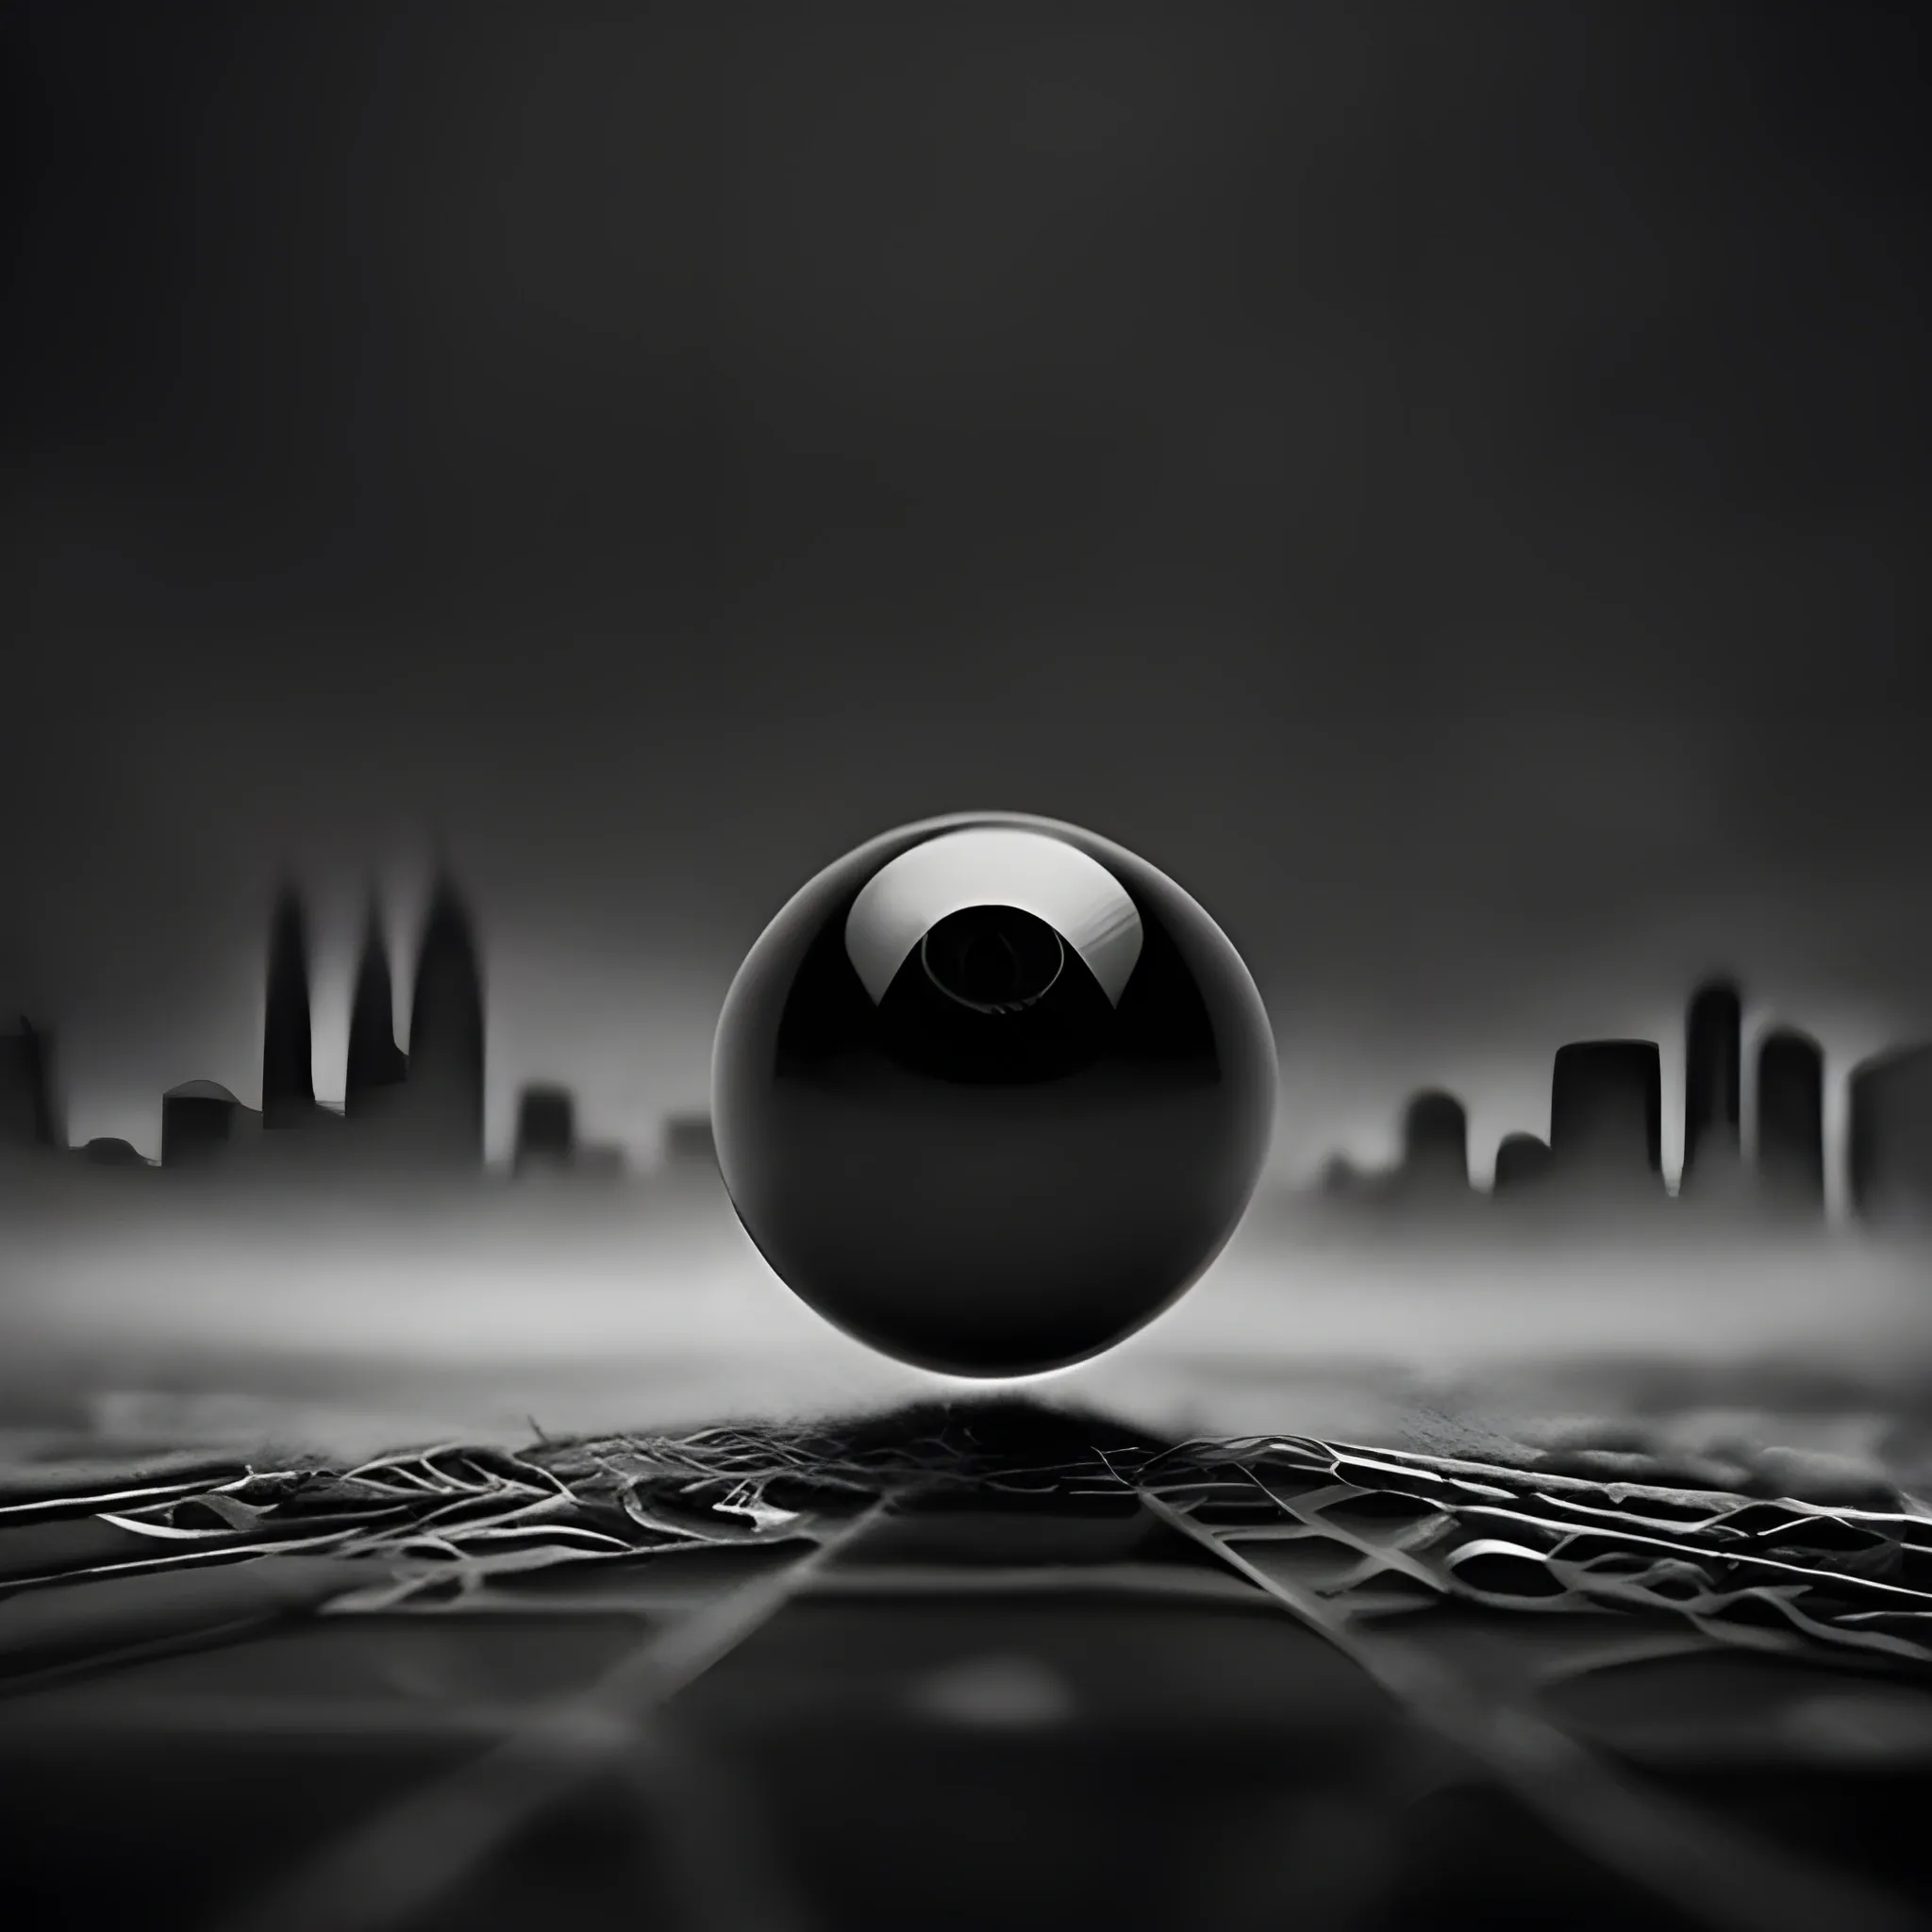 "rfktrstyle, A mesmerizing and ultra-realistic close-up photograph capturing the eerie image of a spider gracefully traversing a sinister, dystopian cityscape reflected in a haunting eyeball. The lighting sets a mysterious and foreboding mood, enhancing the surreal atmosphere.